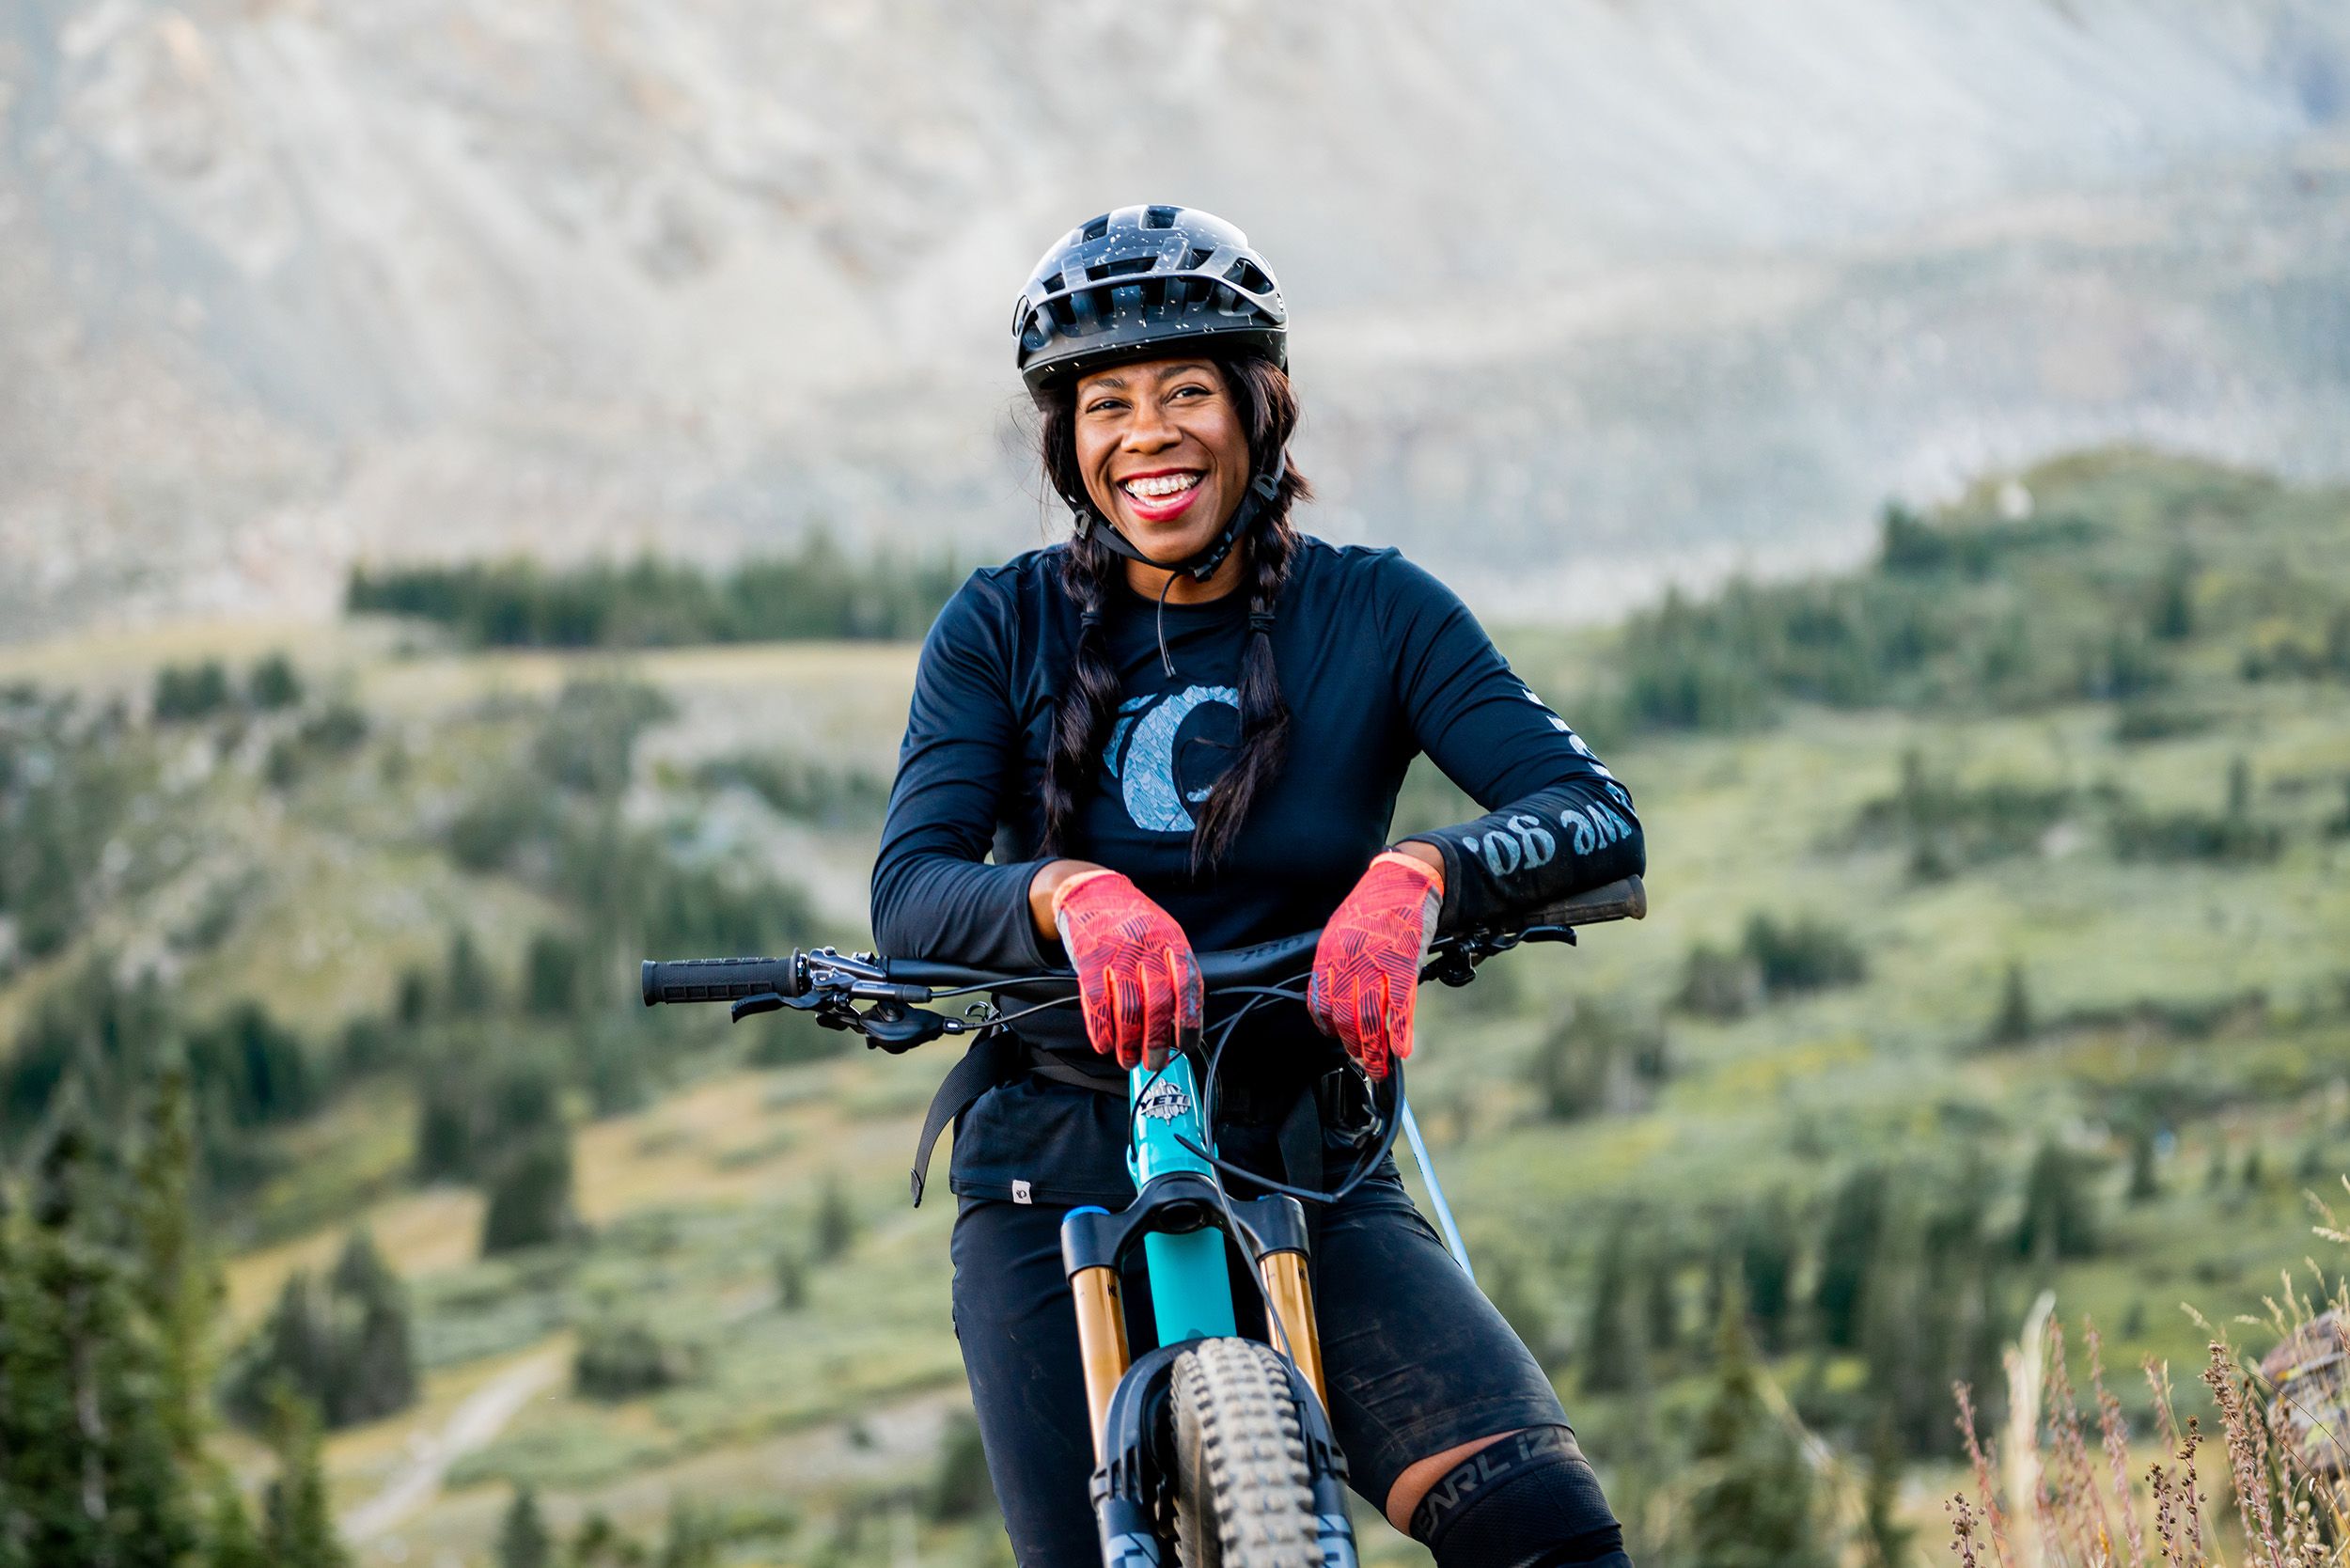 Brooke Goudy - Advocate for More Representation in Cycling